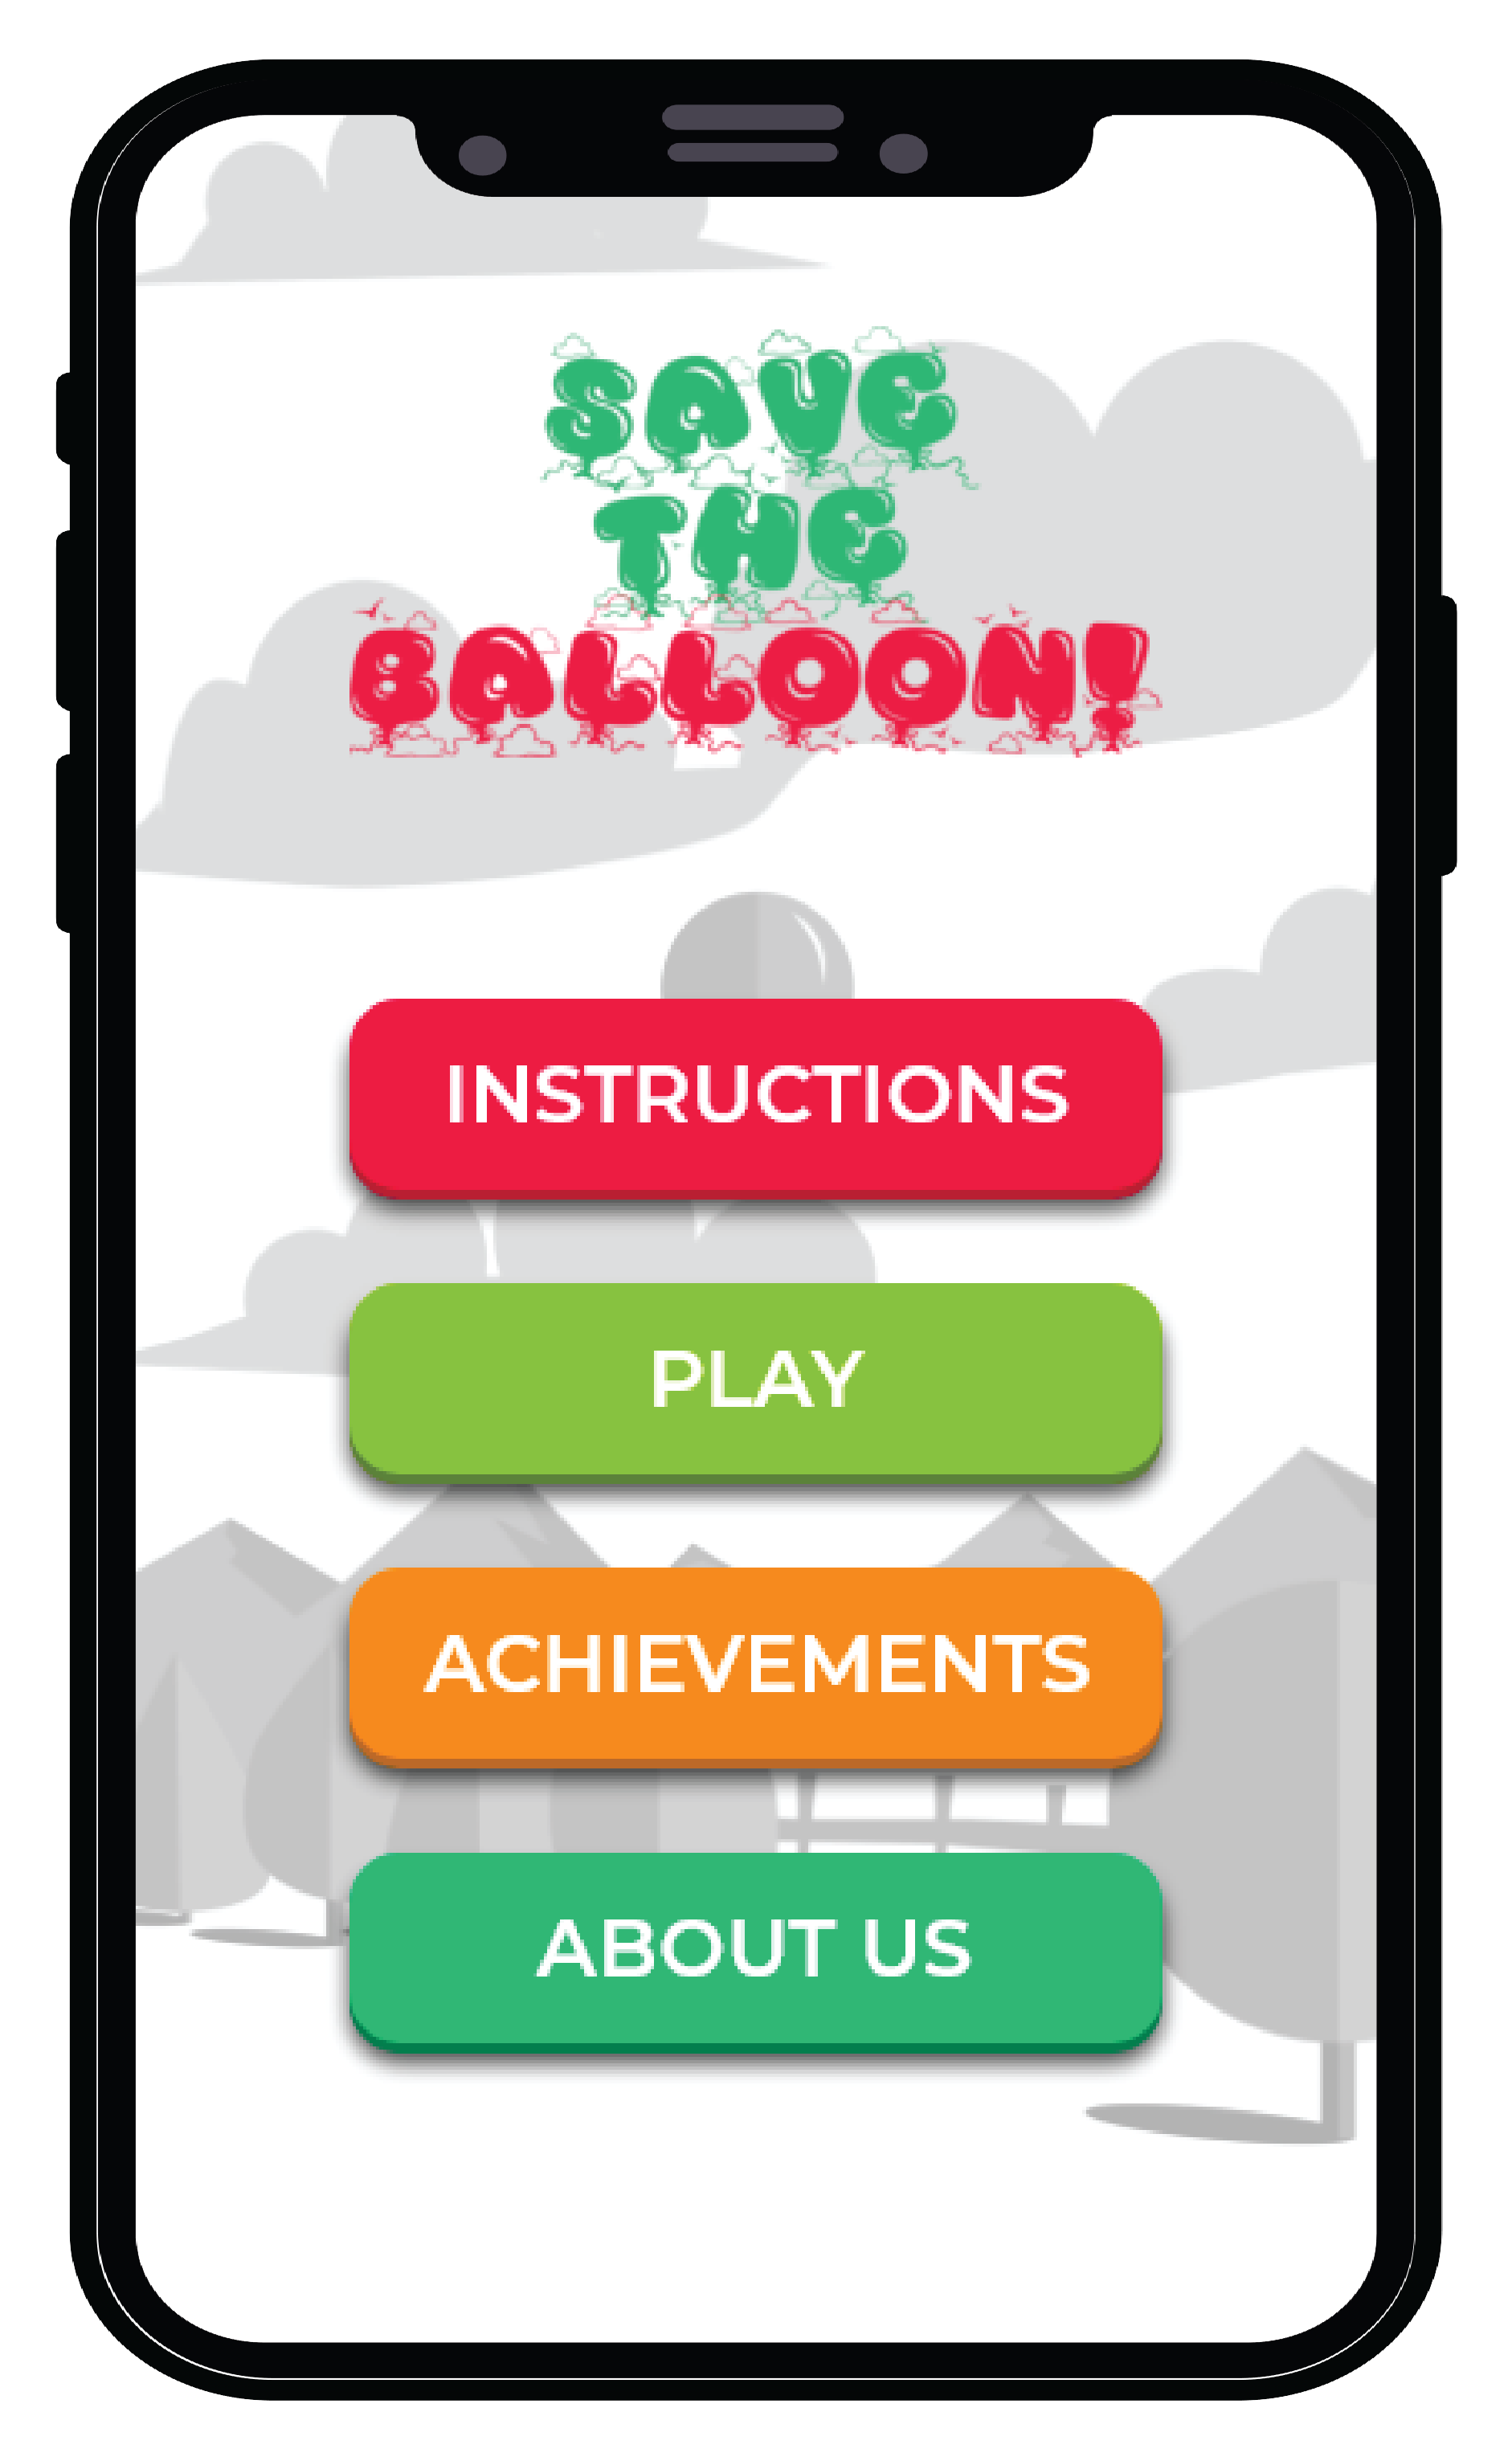 Responsive image about the balloon game